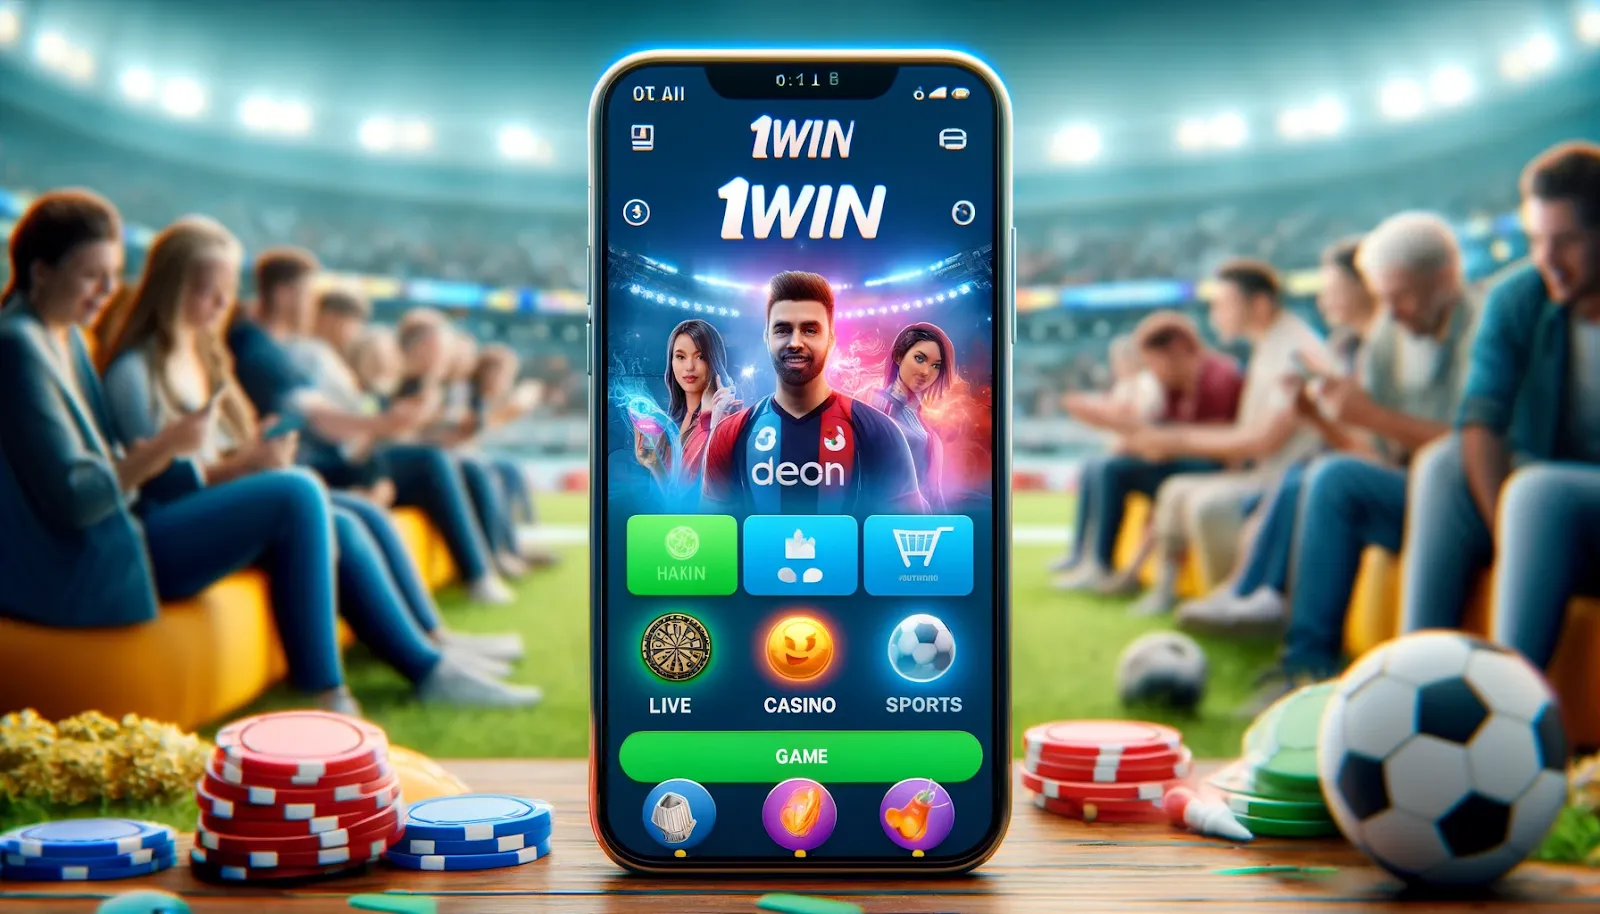 Top Features of the 1win App You Should Know About